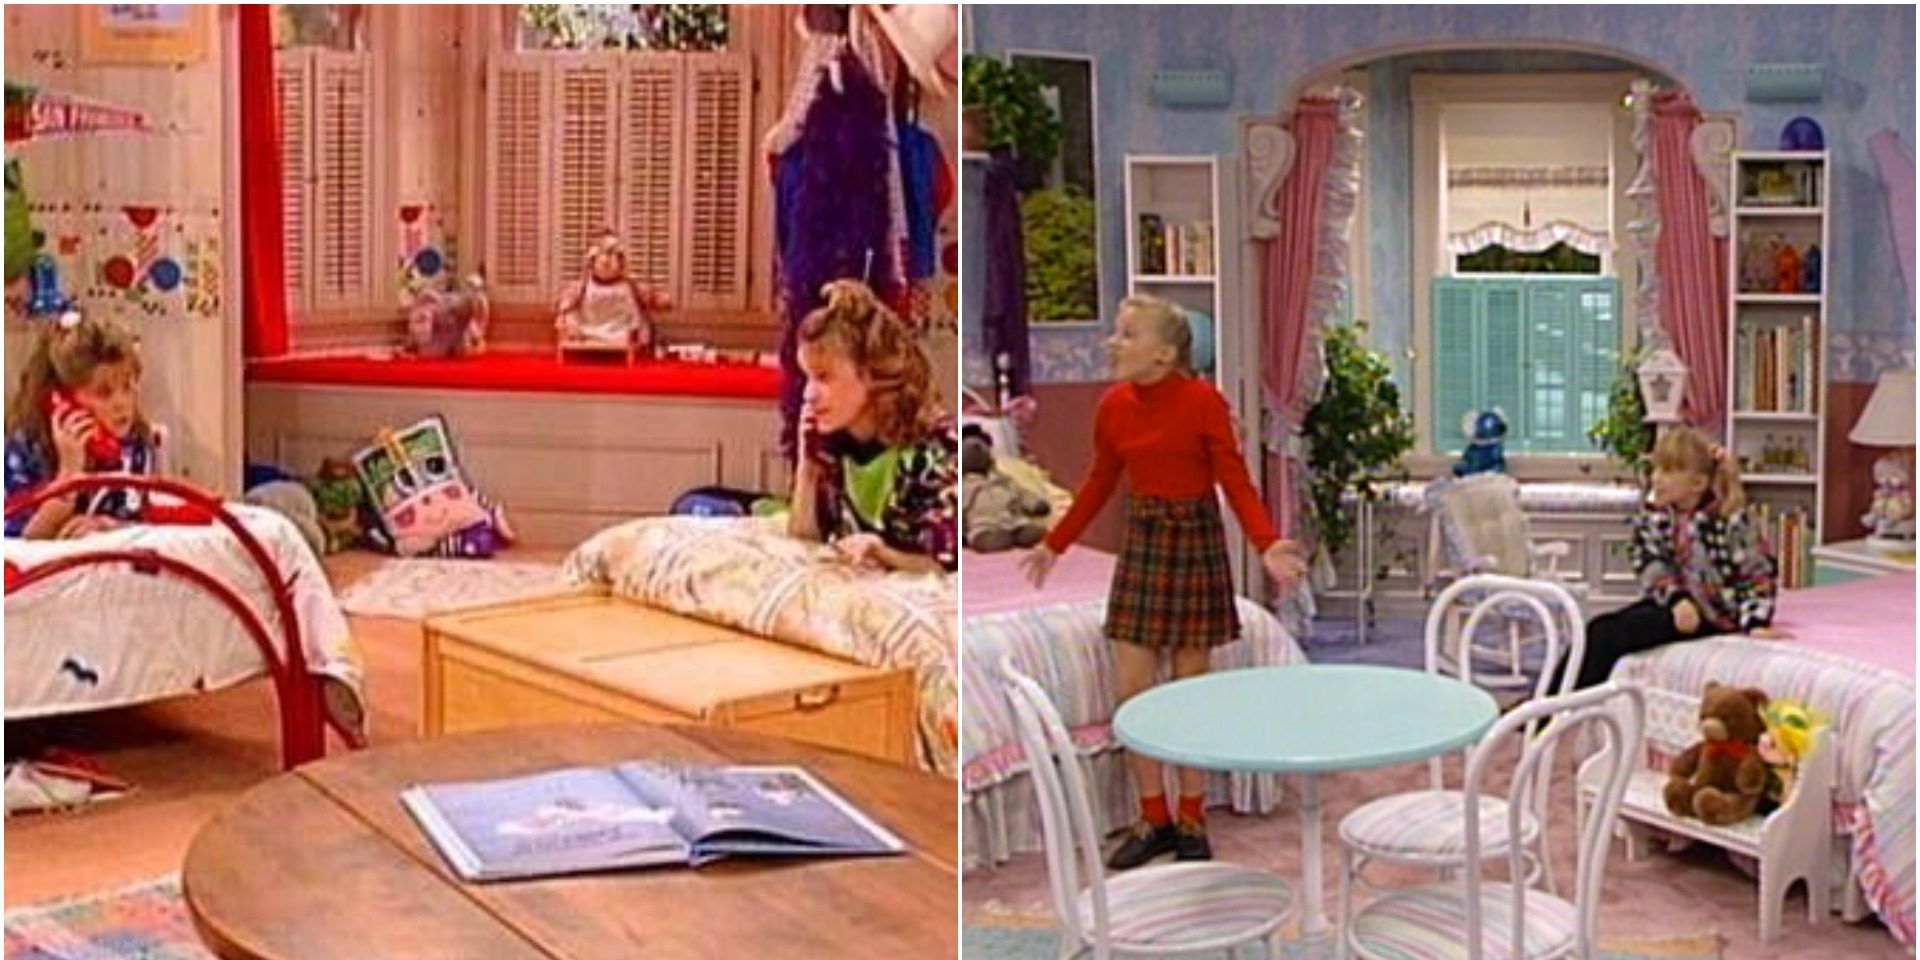 10 Full House Writers Who Also Worked On Disney Channel Shows